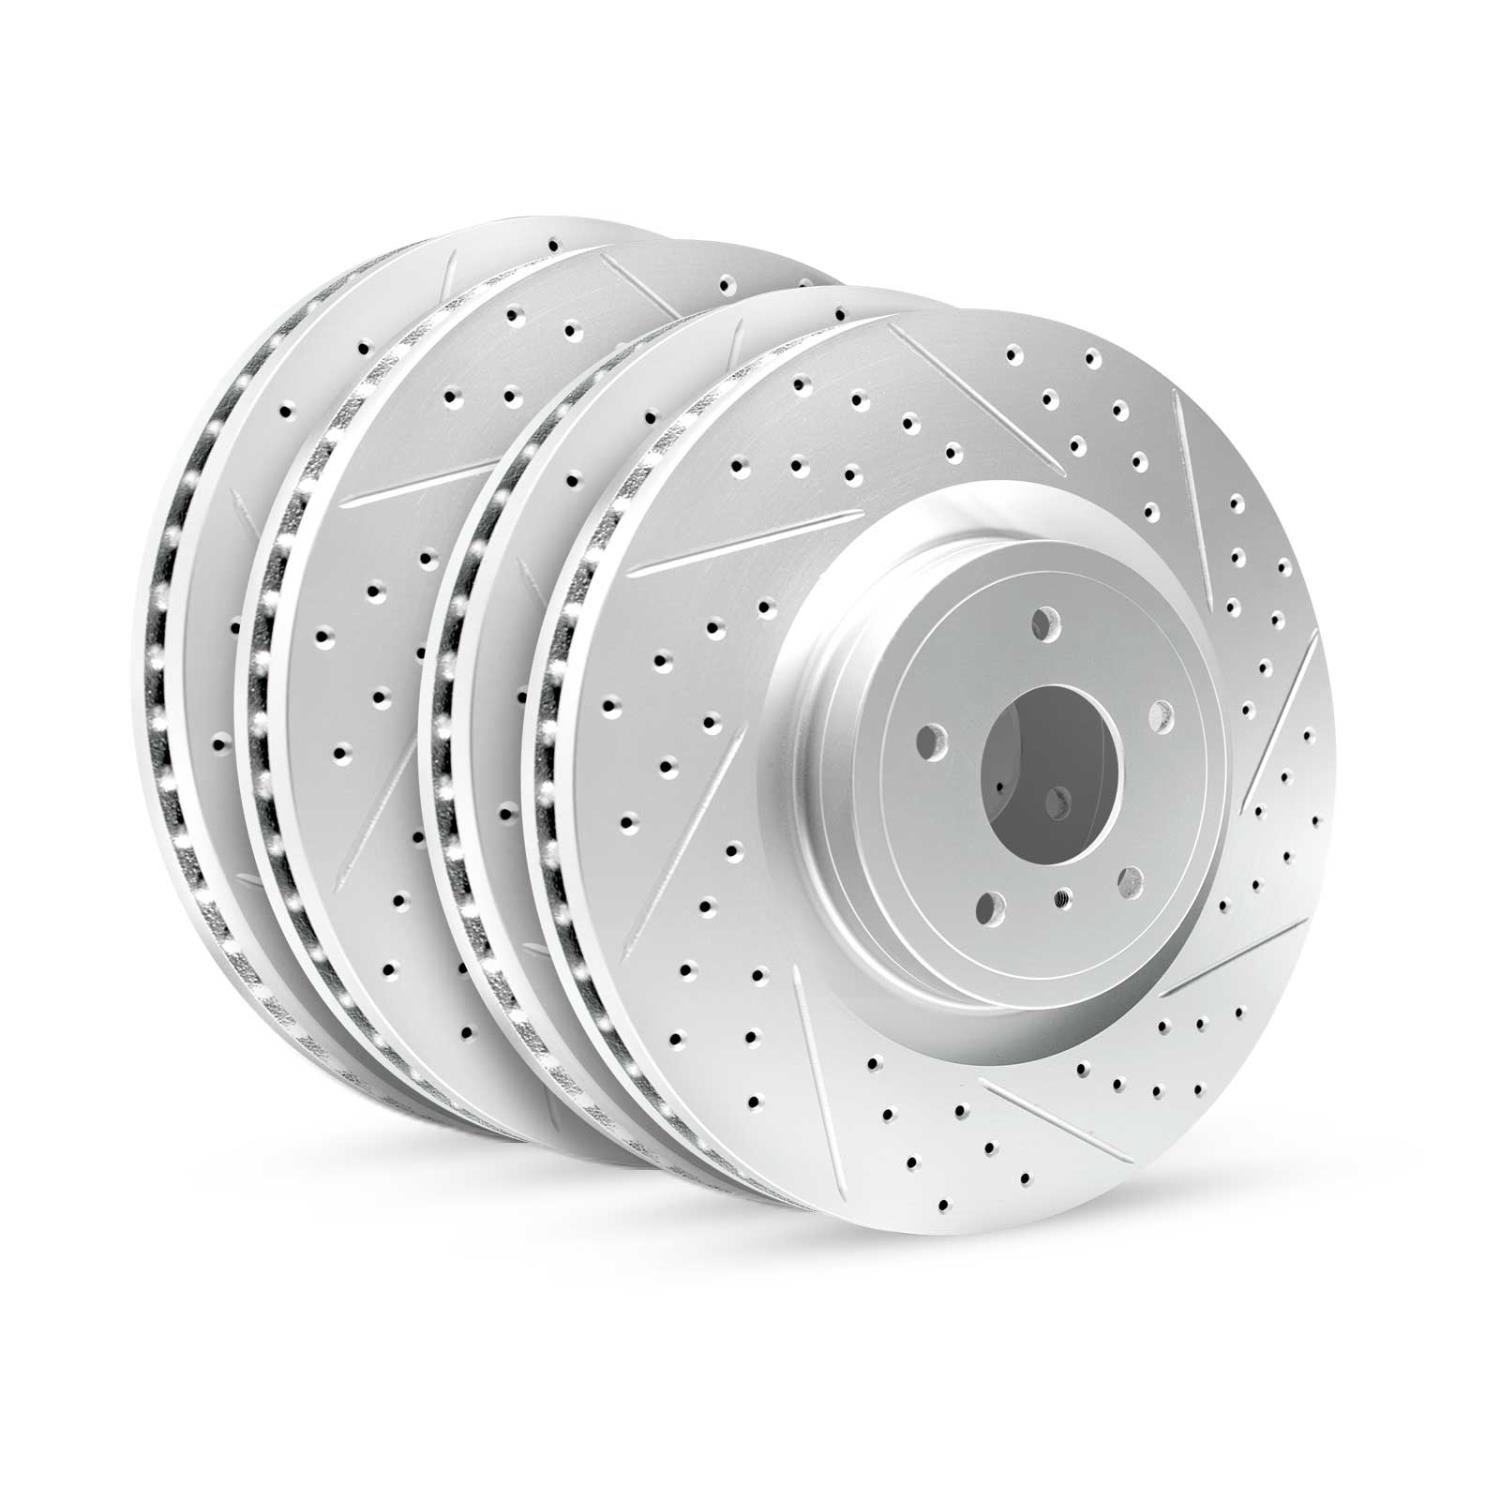 GEO-Carbon Drilled/Slotted Rotors, 2015-2019 Subaru, Position: Front/Rear